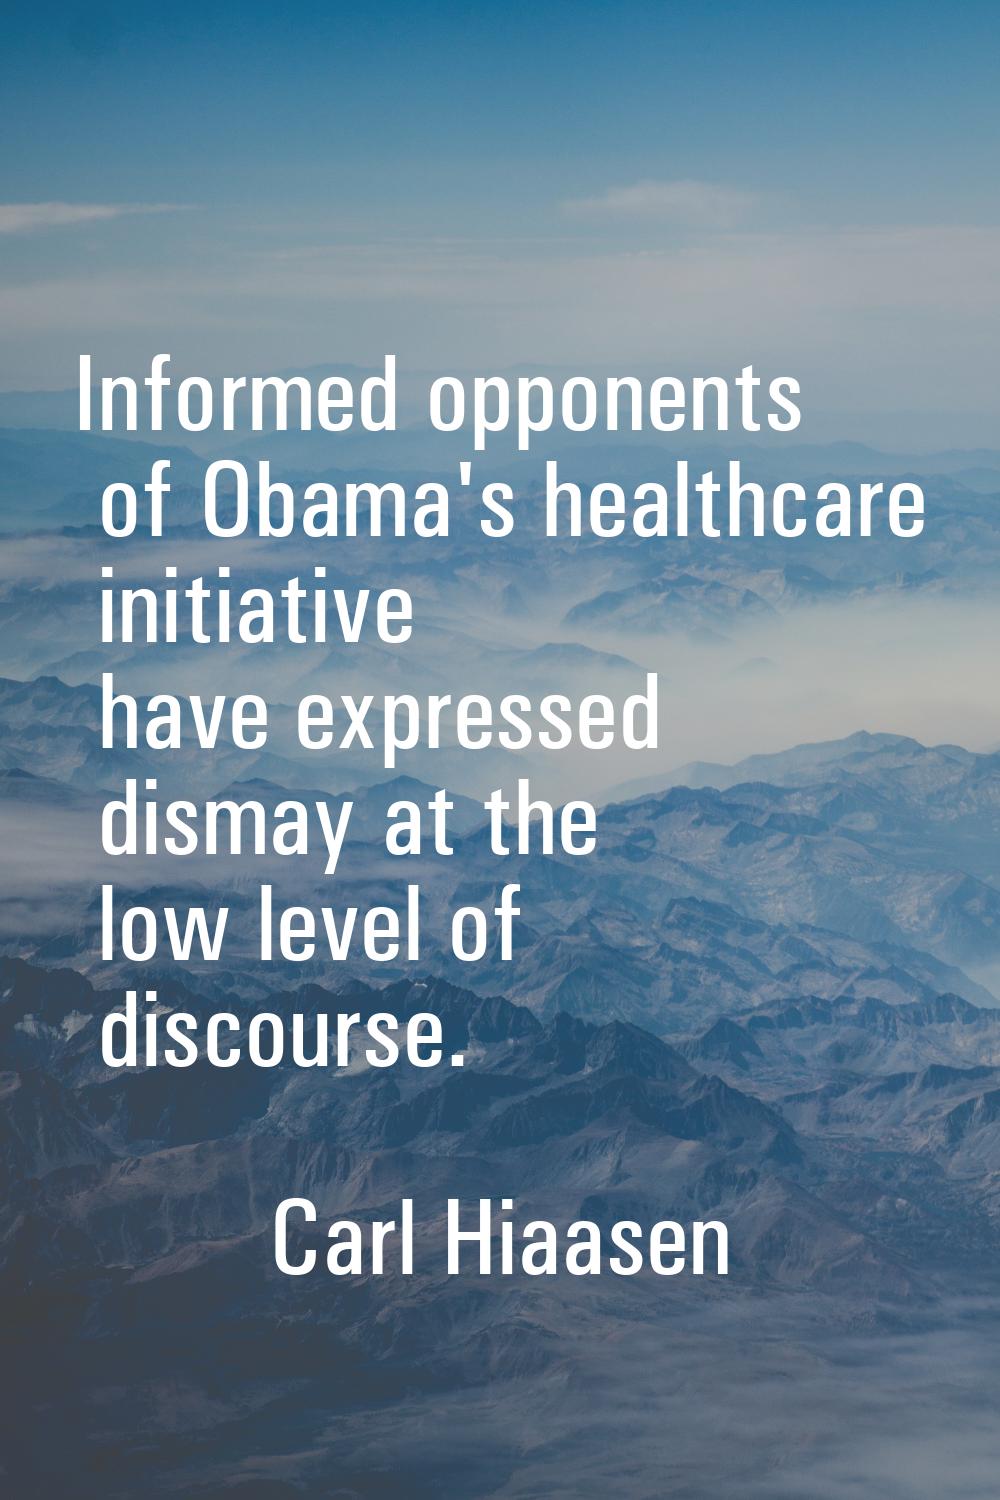 Informed opponents of Obama's healthcare initiative have expressed dismay at the low level of disco